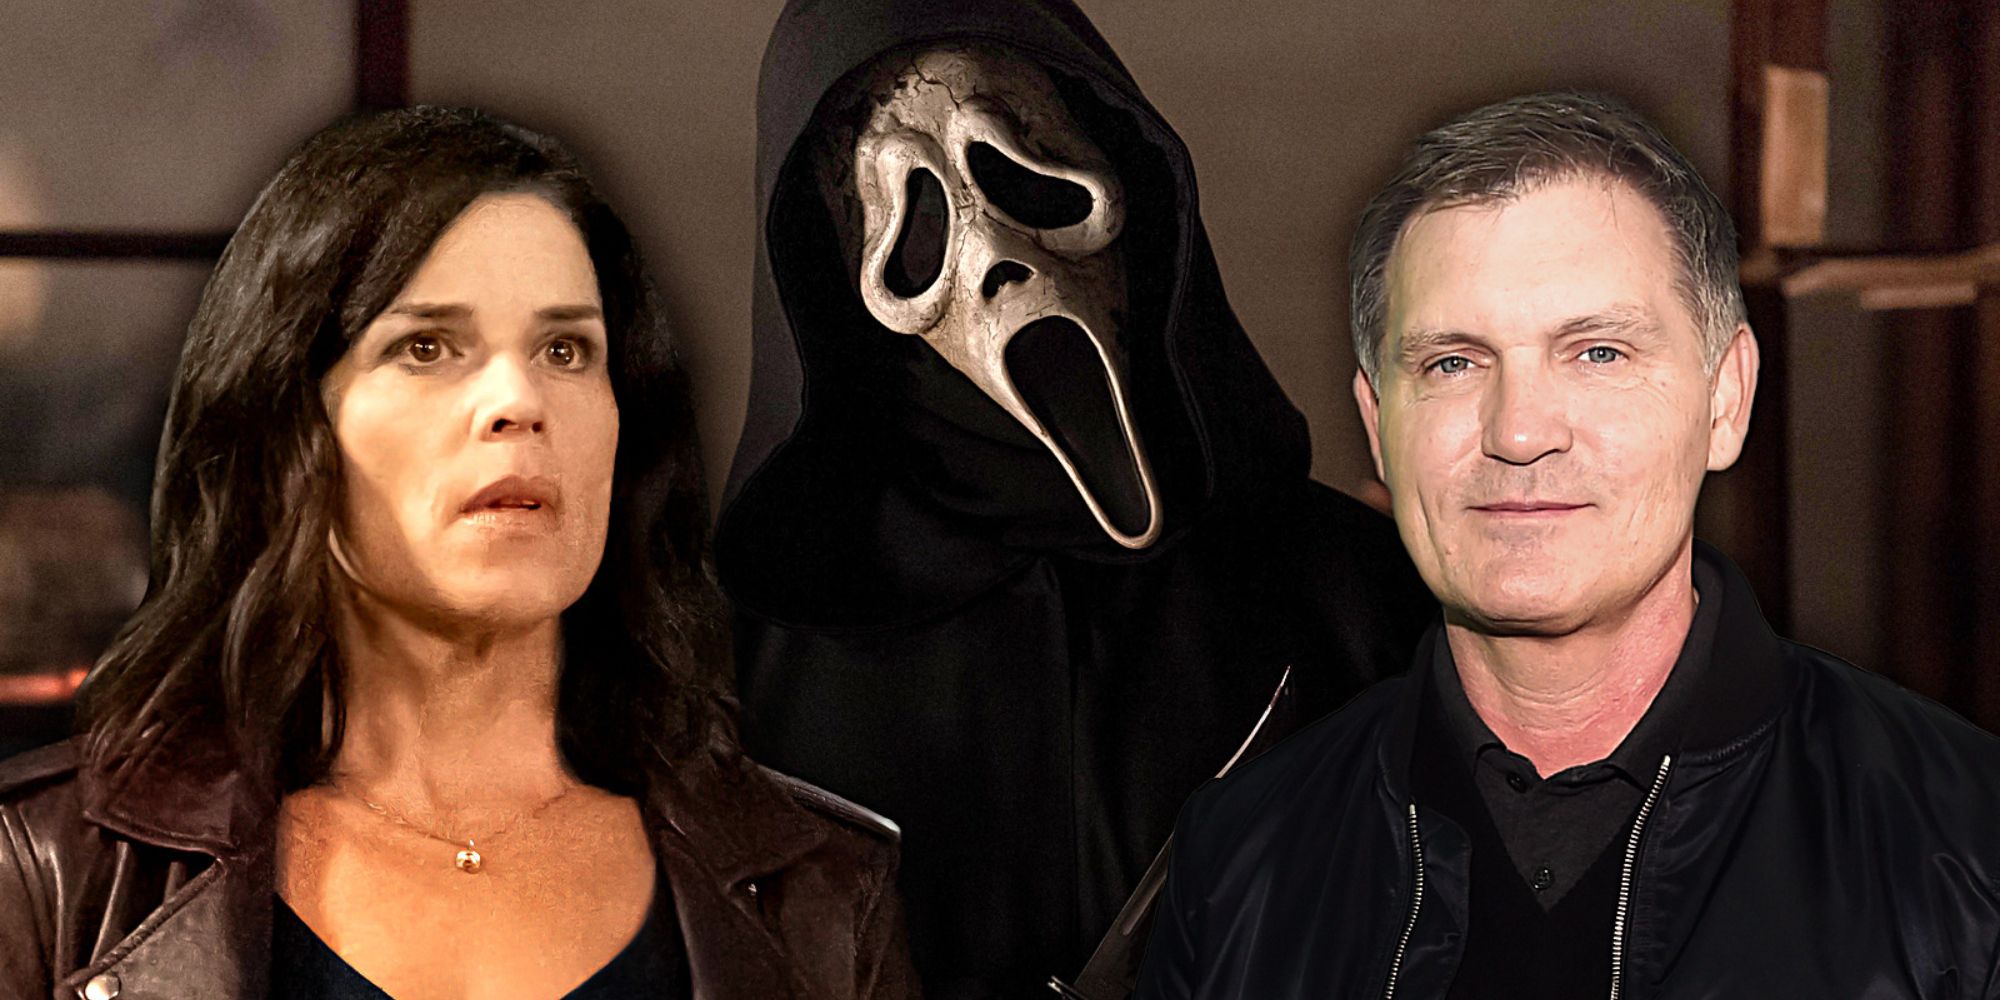 Neve campbell/ghostface/kevin williamson